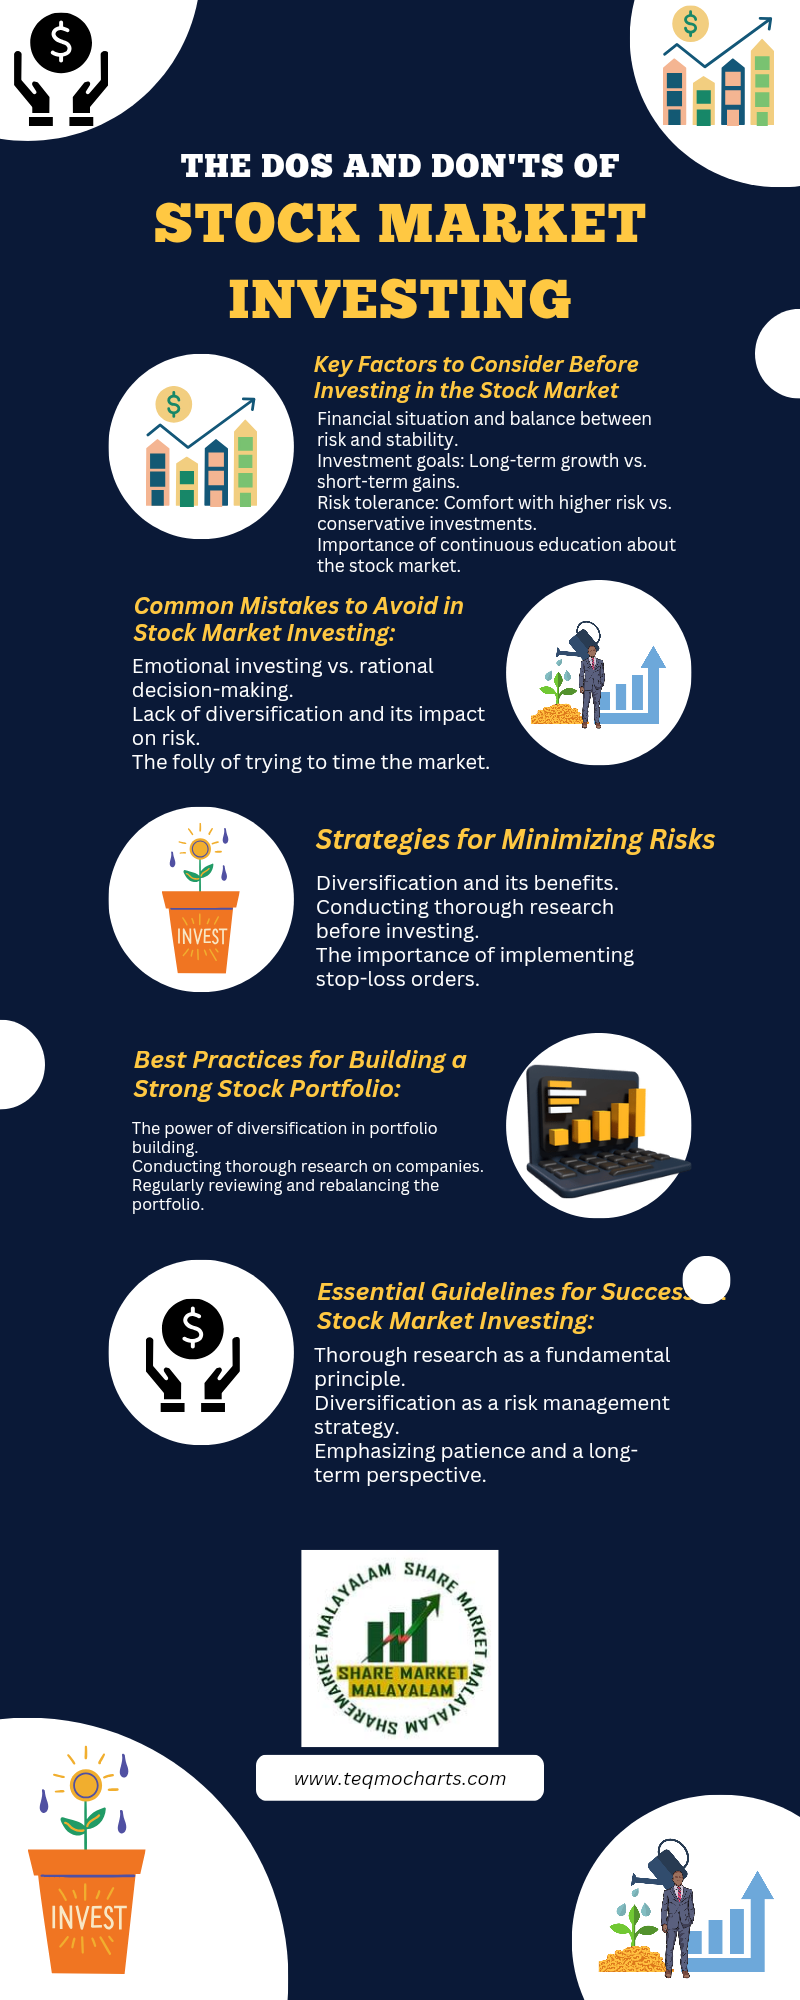 The Dos and Don'ts of Stock Market Investing